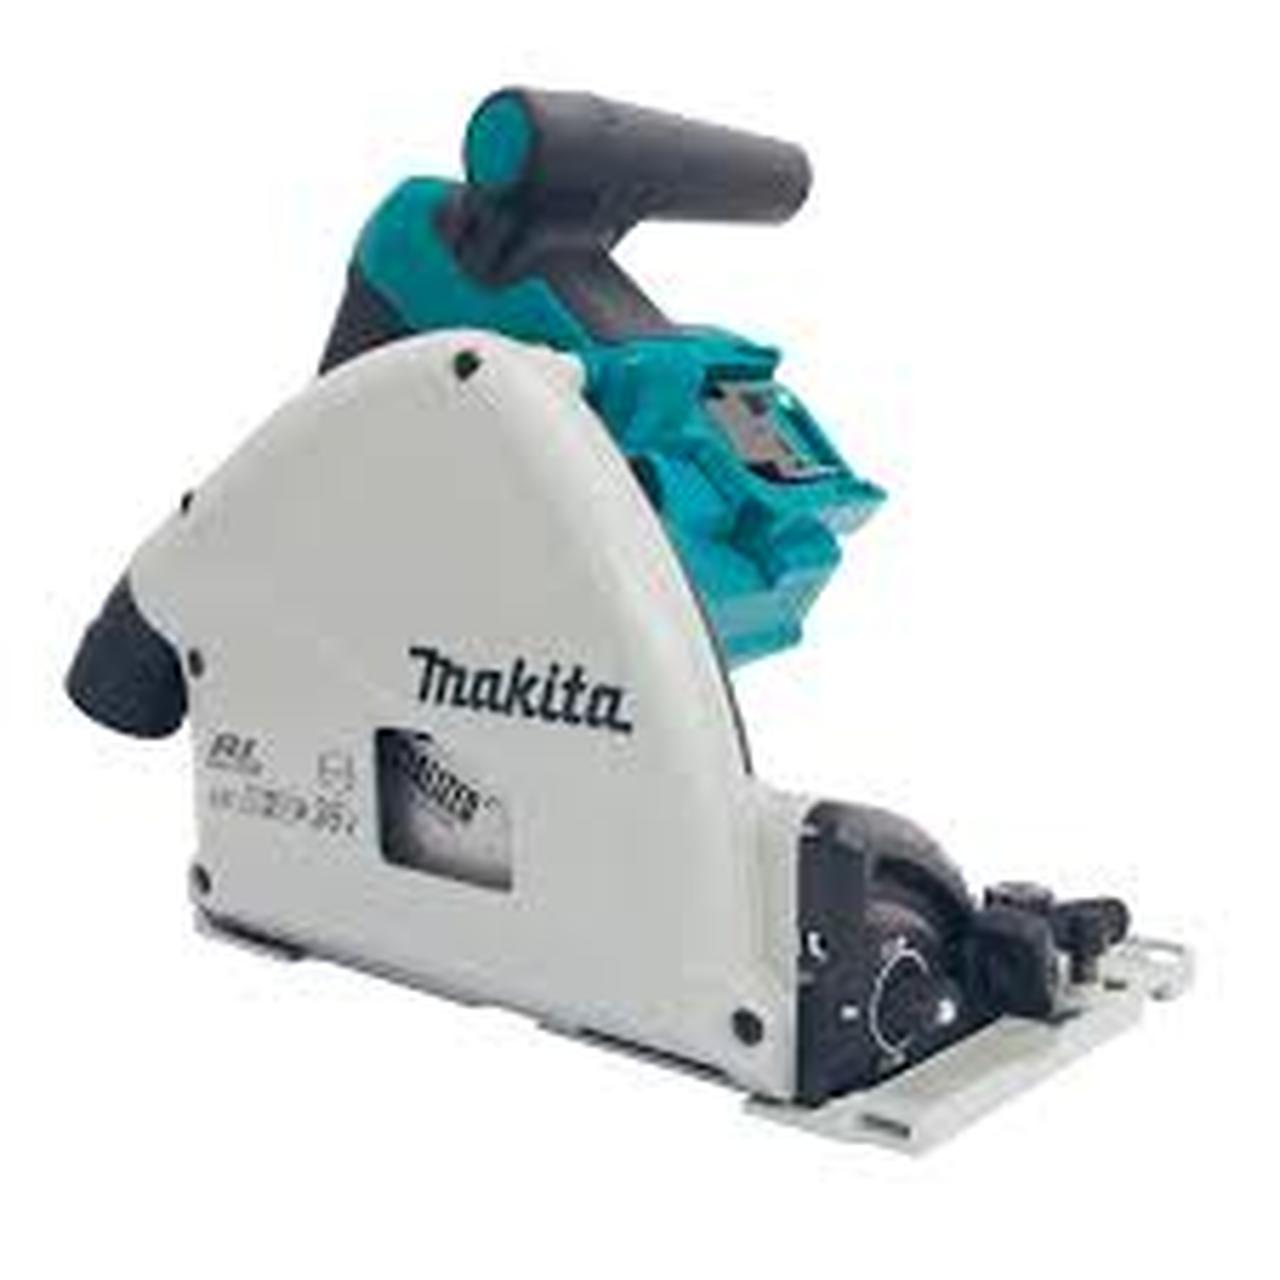 Makita  DSP600ZJ  -  18Vx2 (36V) LXT 6-1/2" Plunge Cut Circular Saw (Tool only) - wise-line-tools